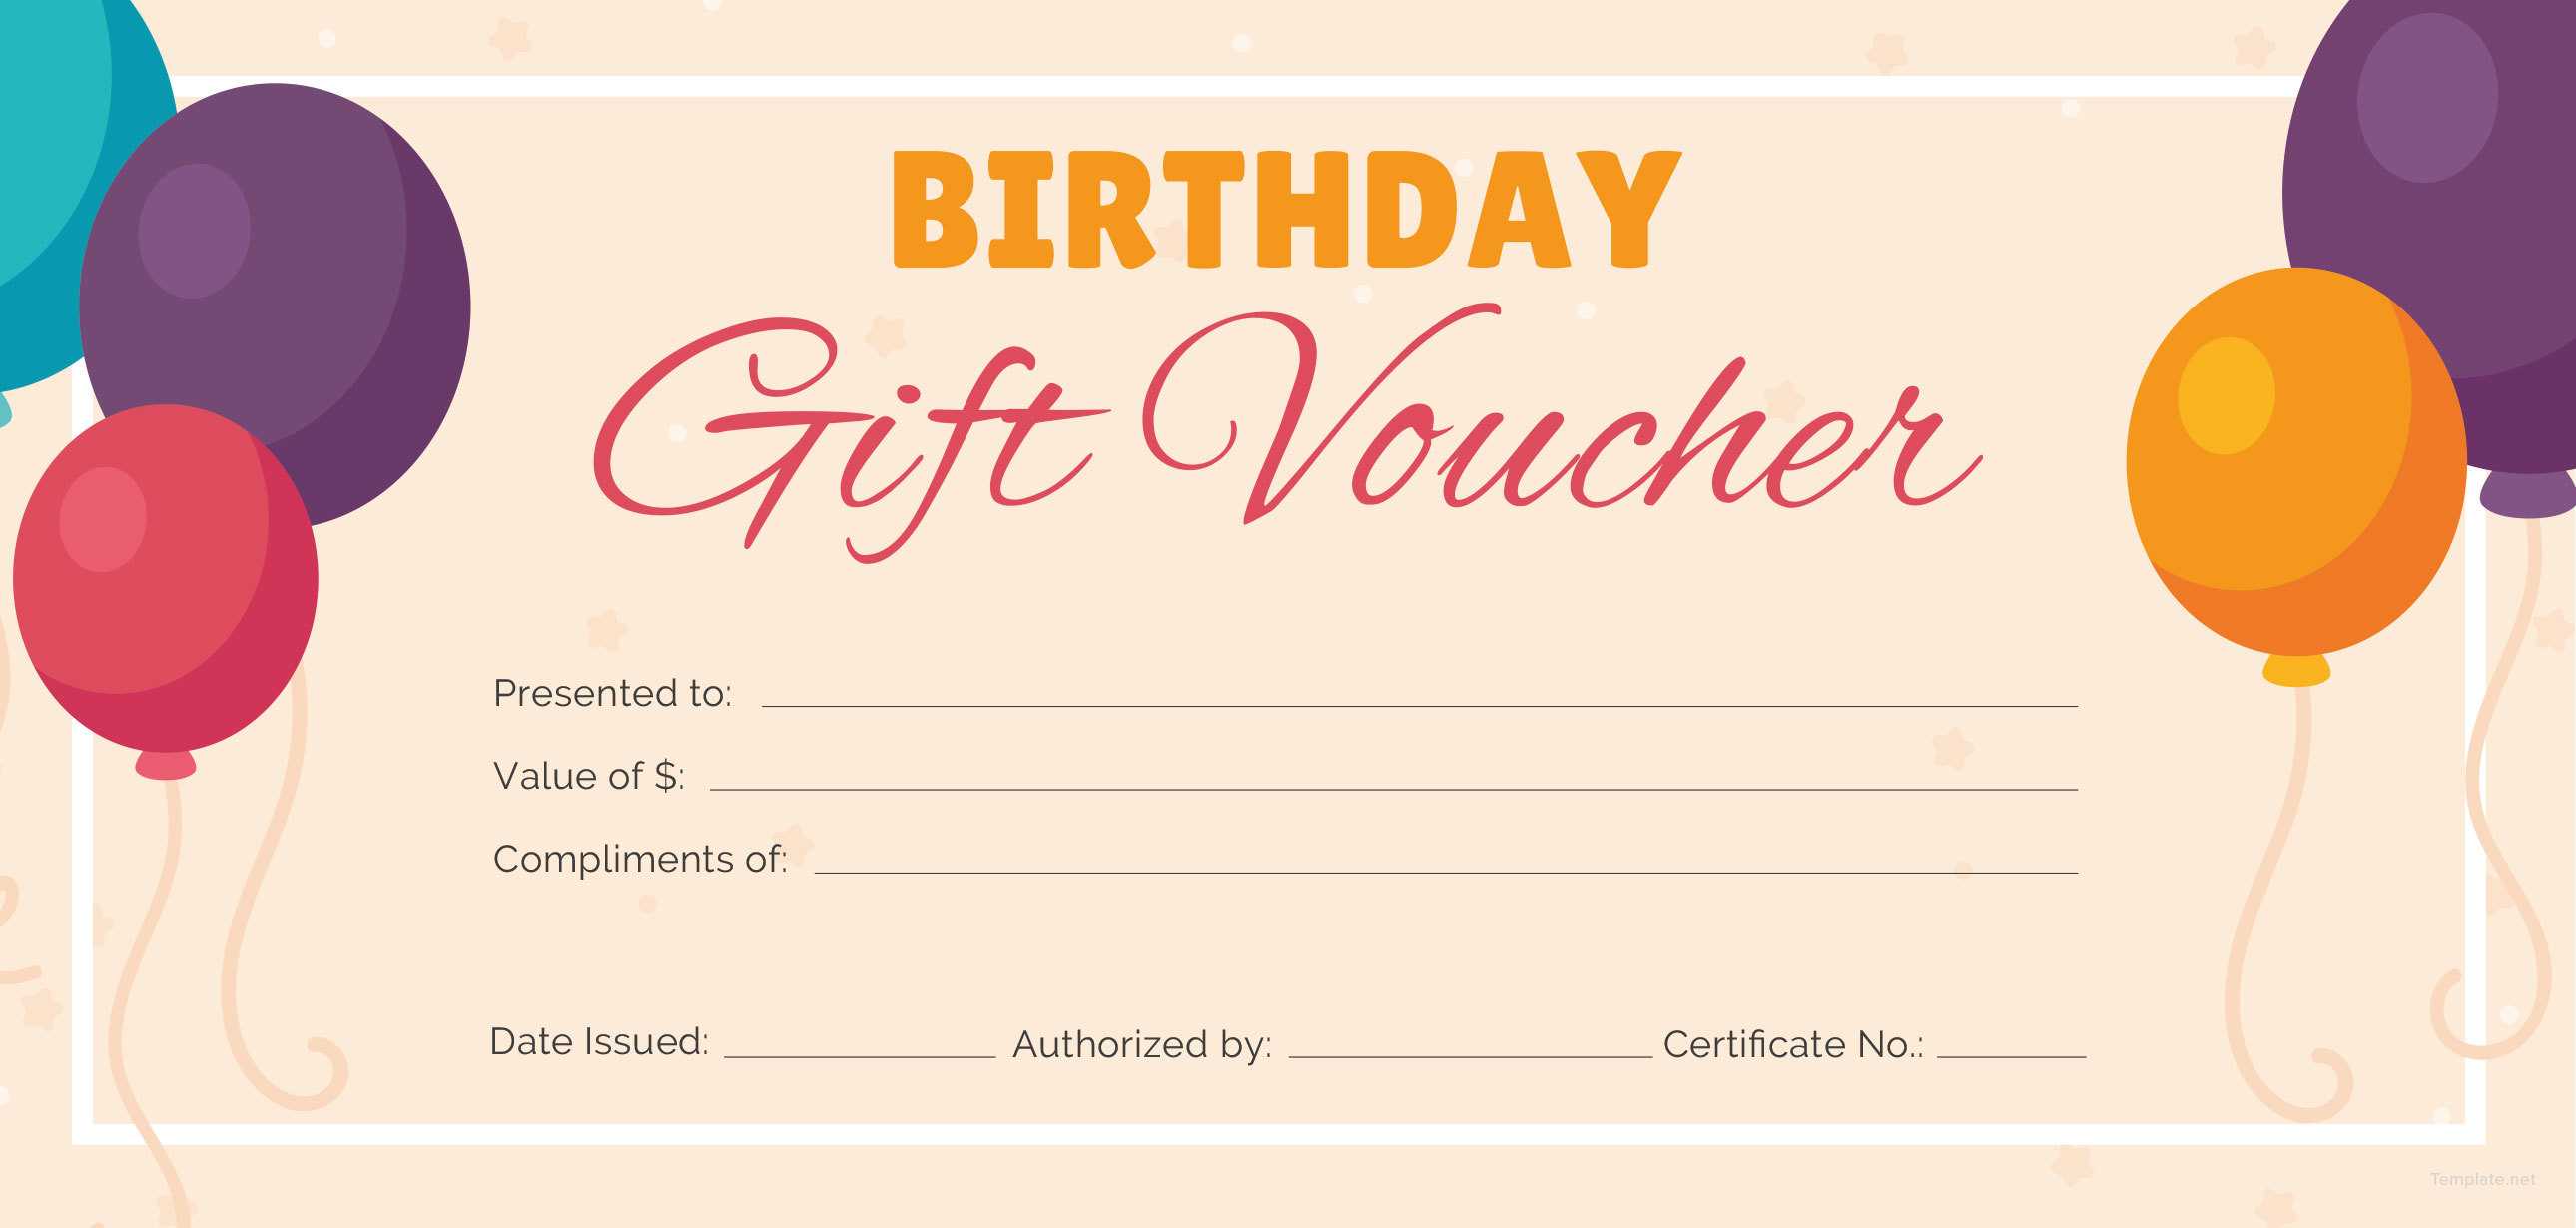 Free Birthday Gift Certificate Templates | Certificate Pertaining To Track And Field Certificate Templates Free